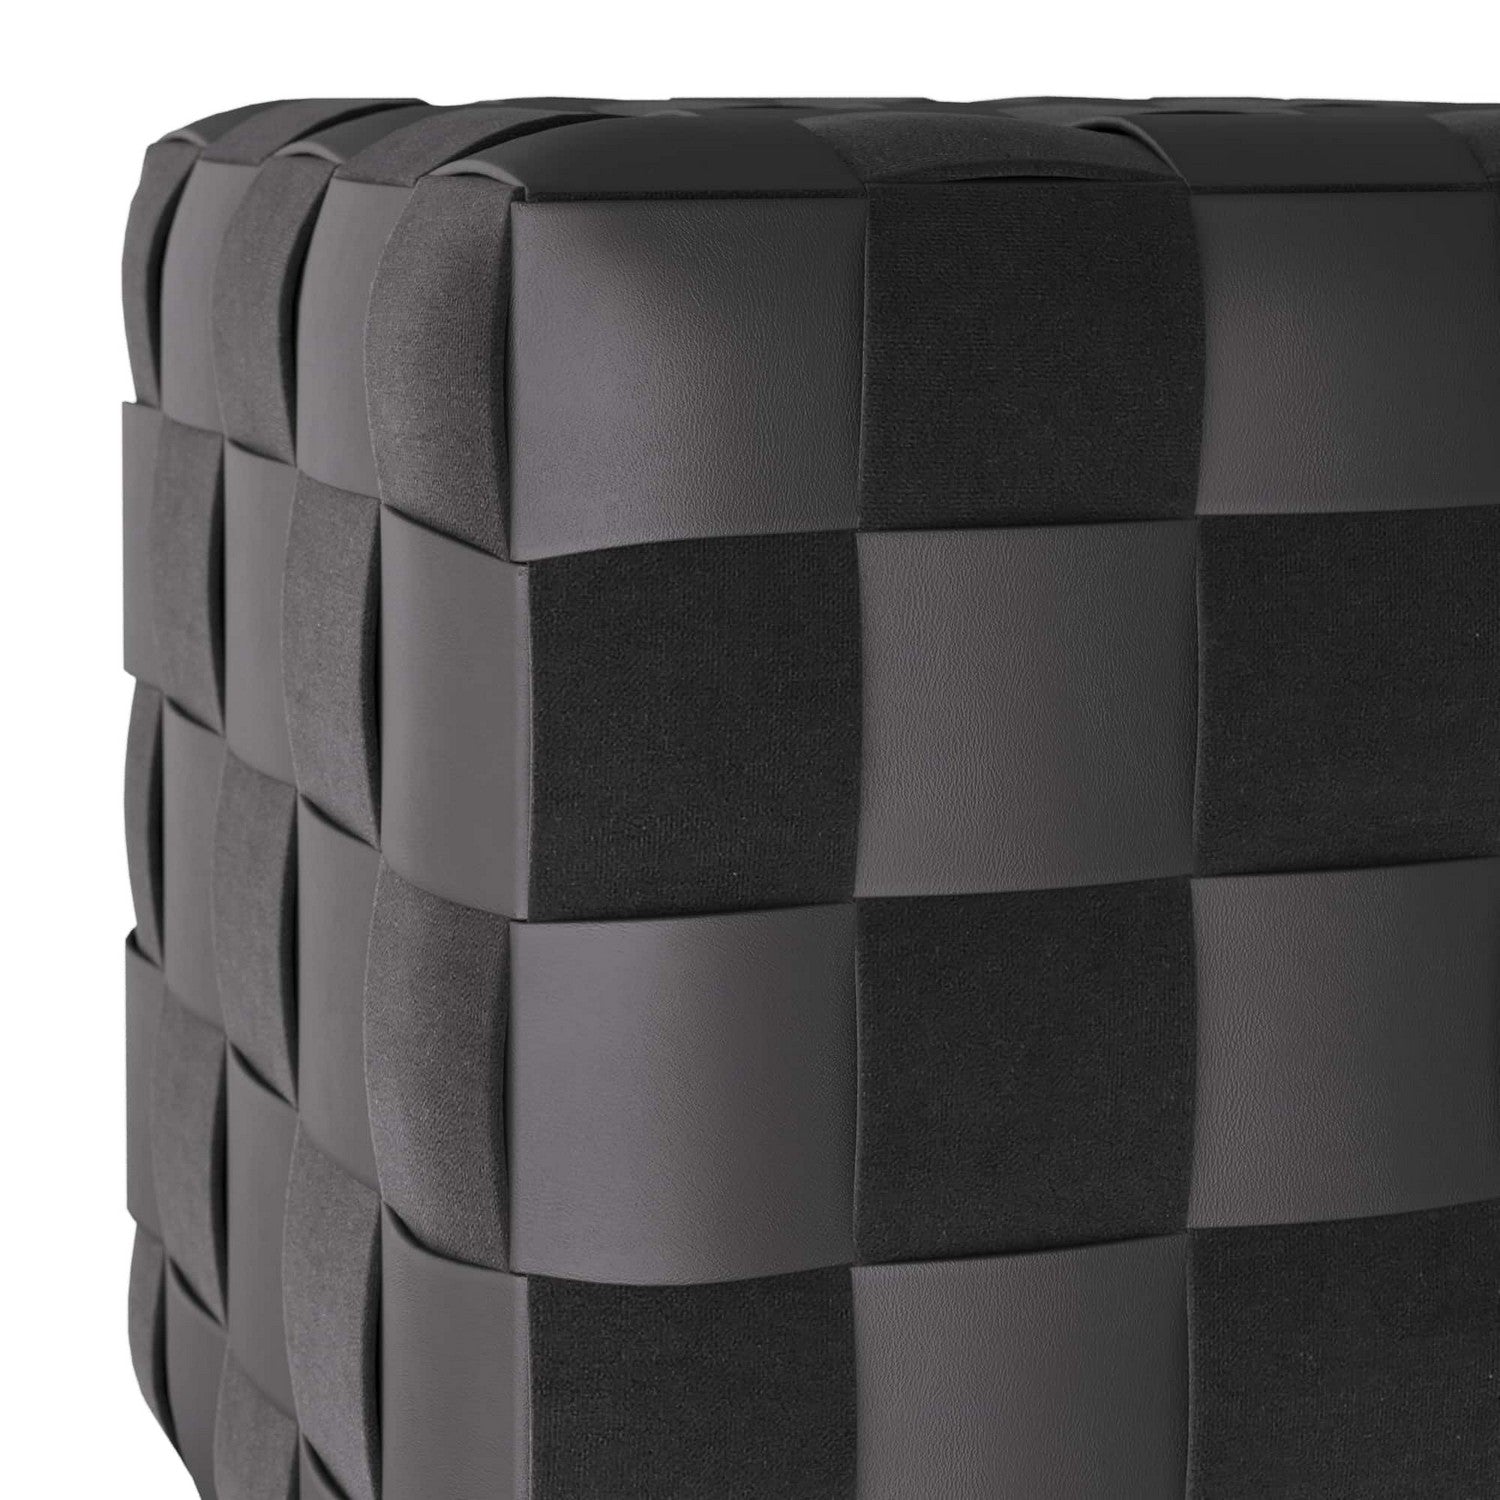 Ottoman from the Winnetka collection in Black finish